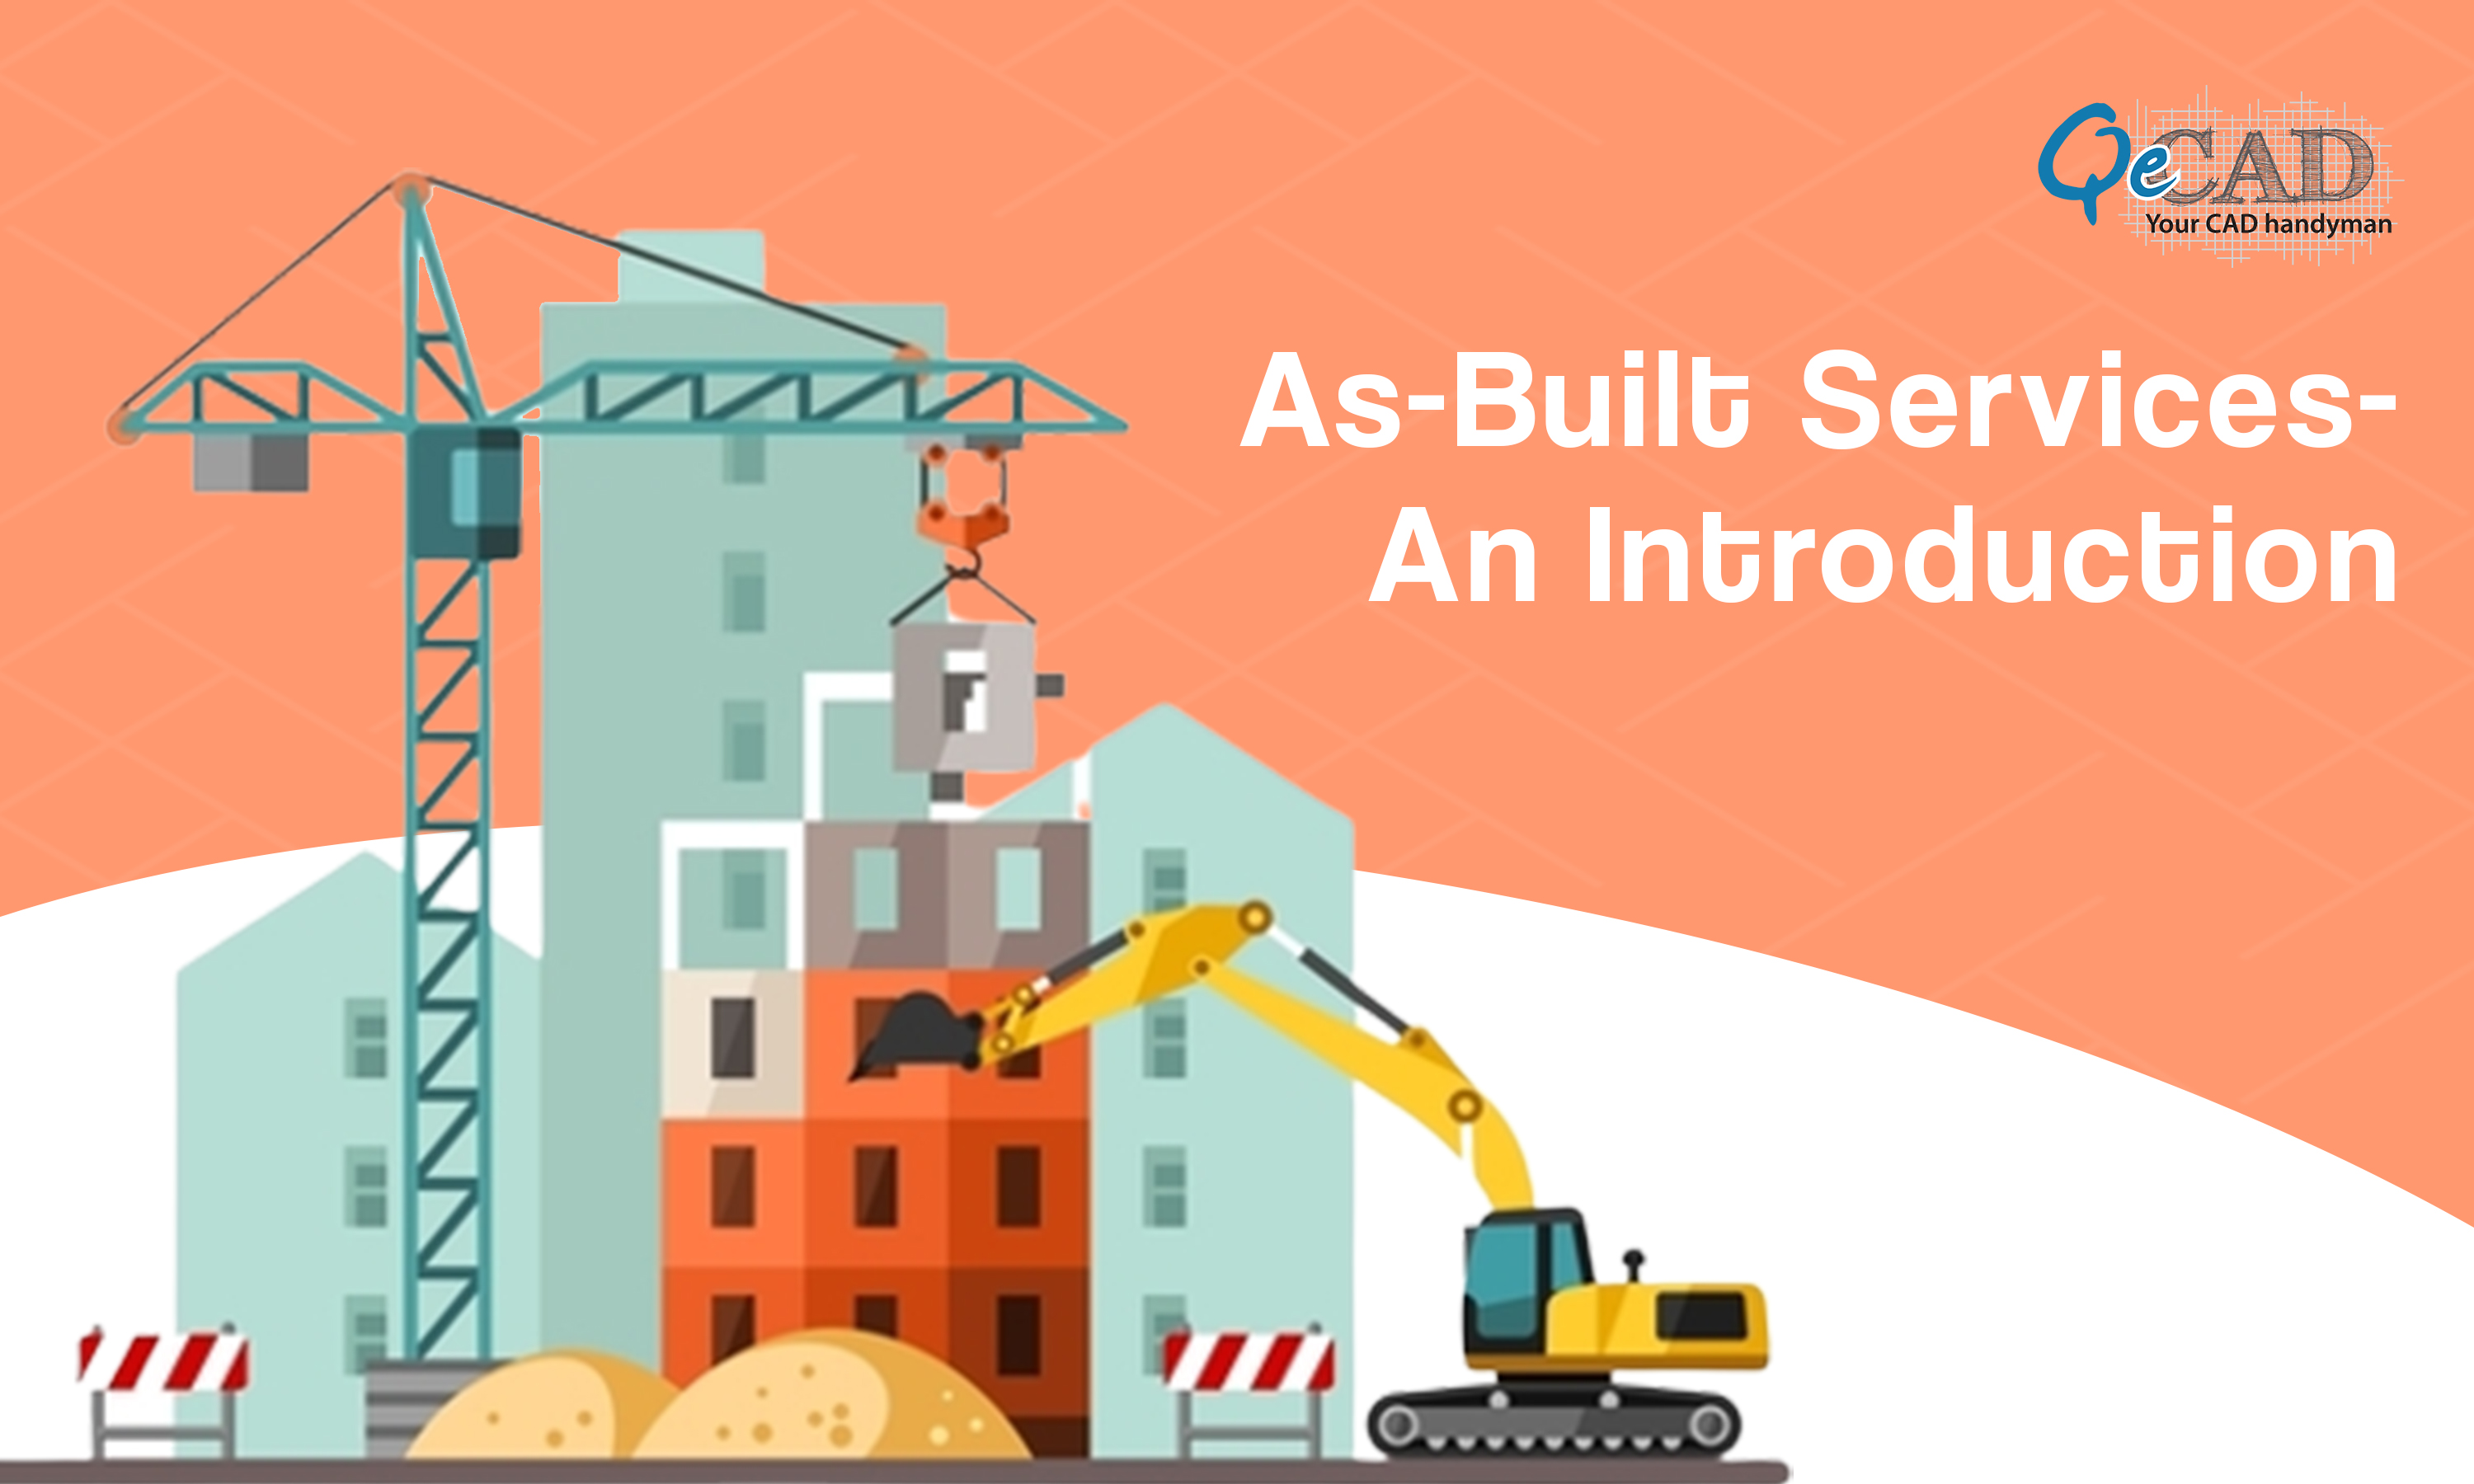 As-Built Services - An Introduction